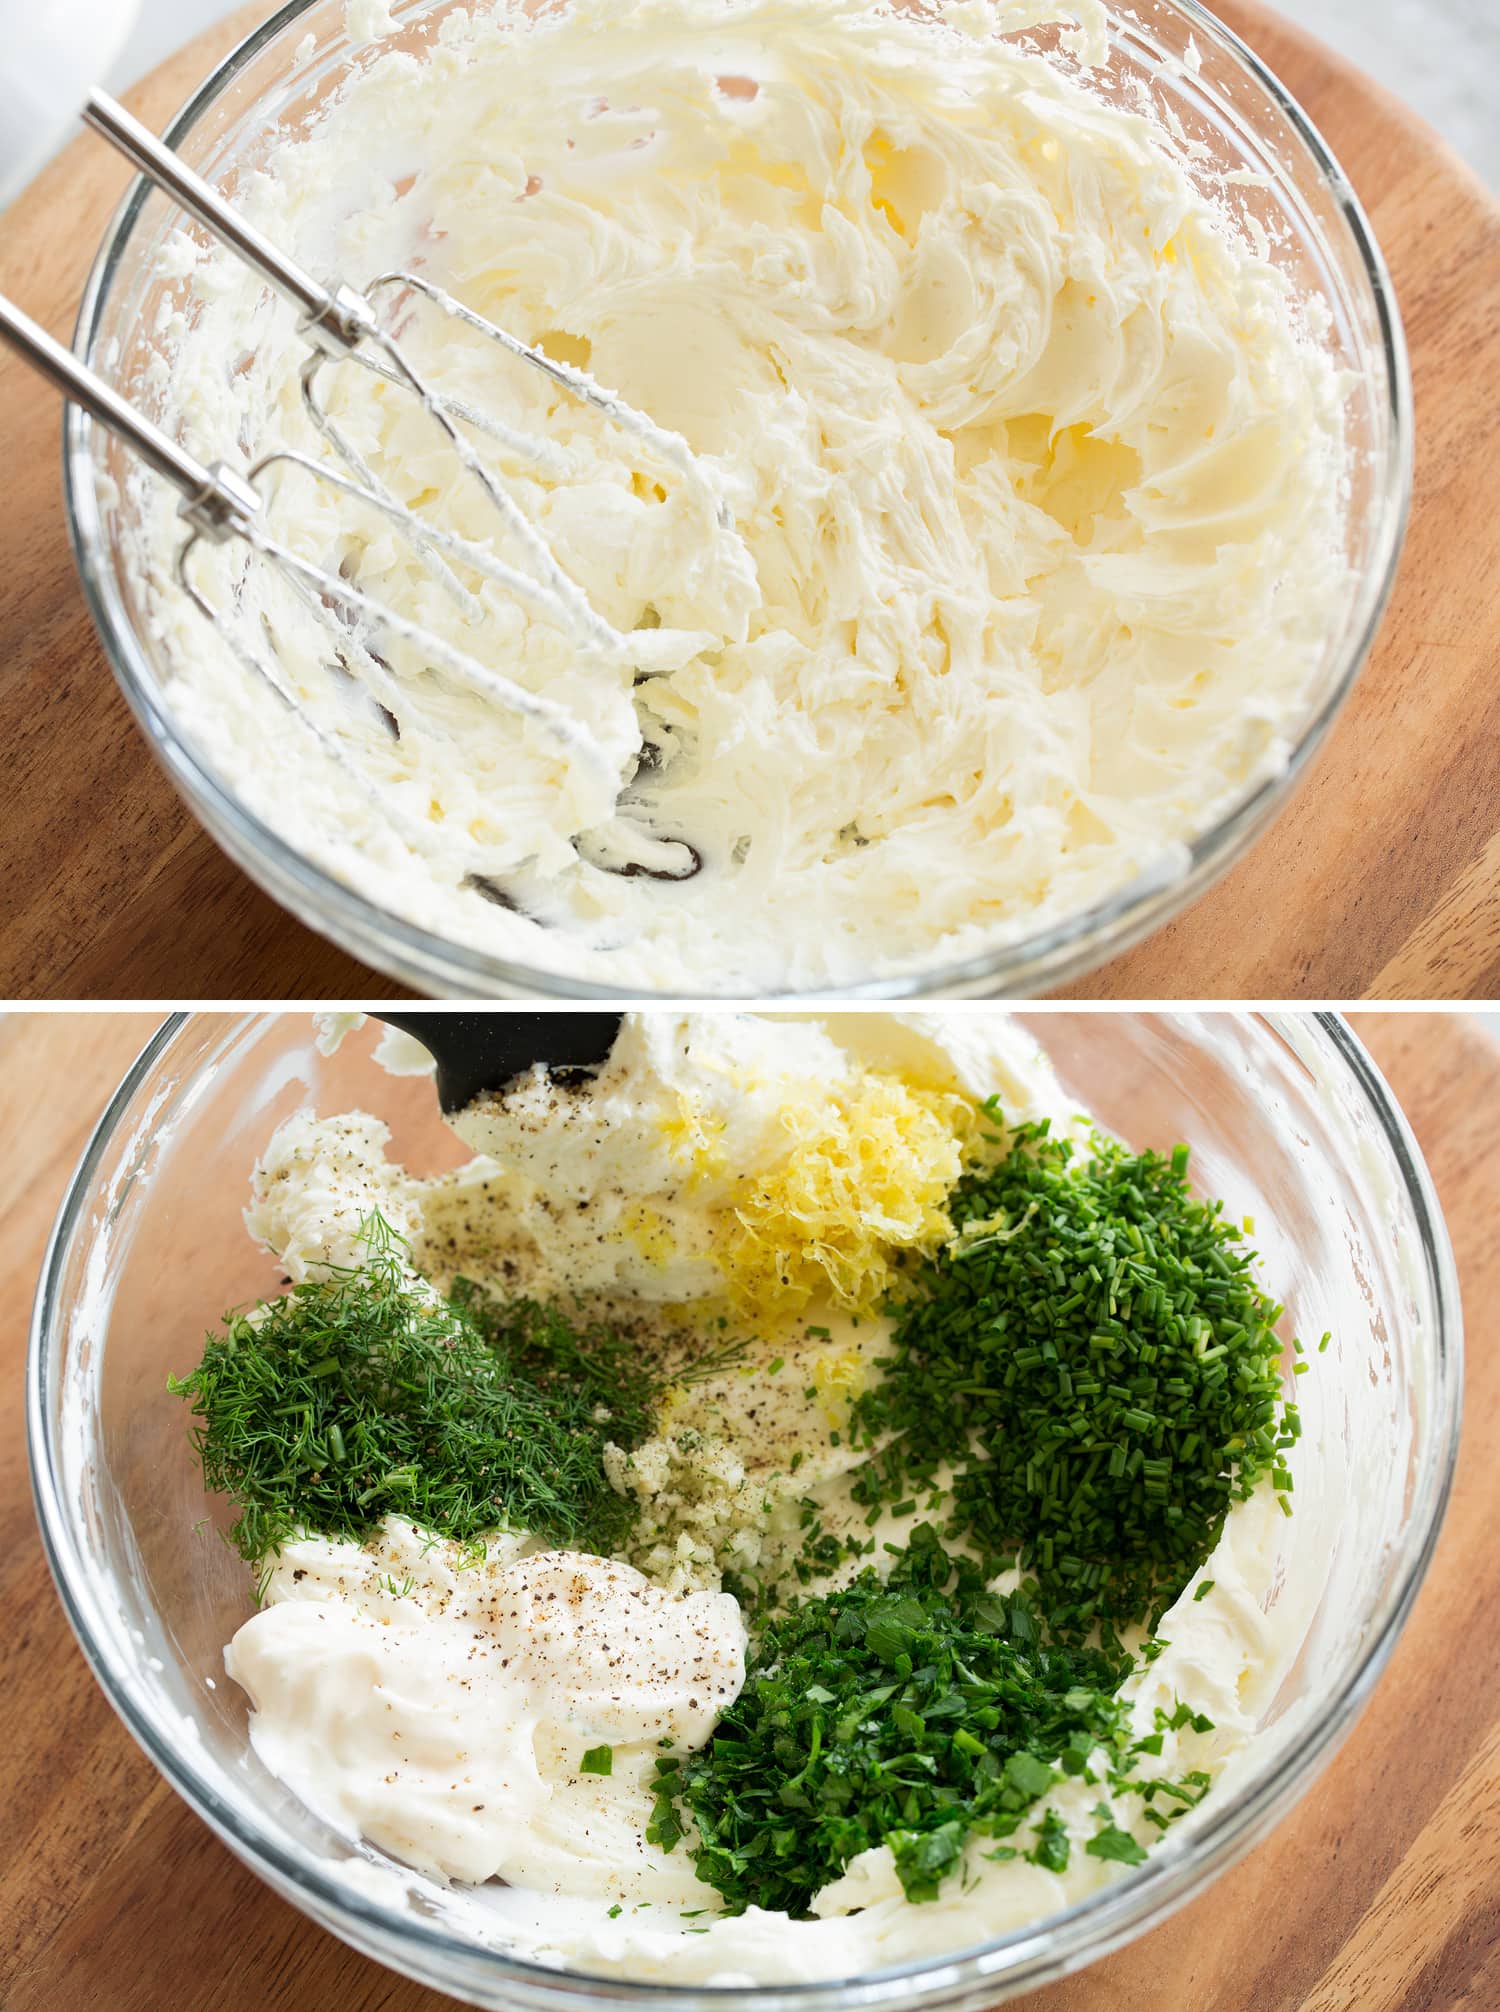 Mixing cream cheese with herbs and lemon.